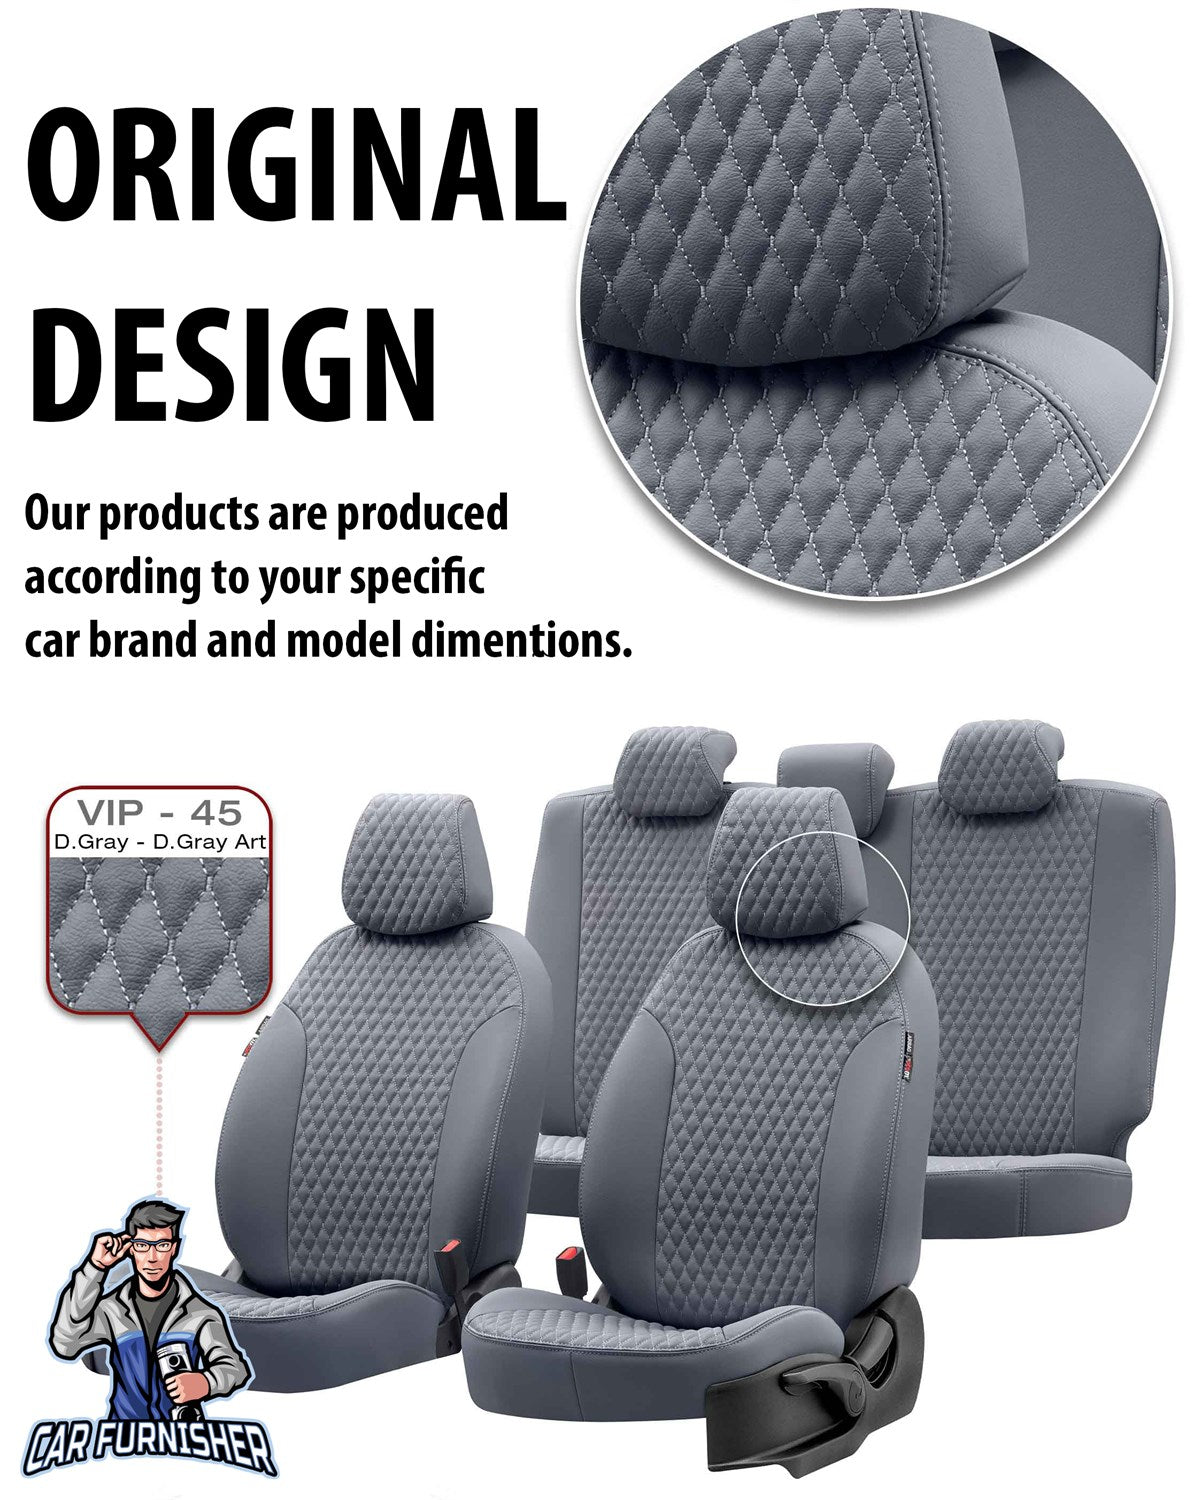 Isuzu Nlr Seat Covers Amsterdam Leather Design Ivory Leather